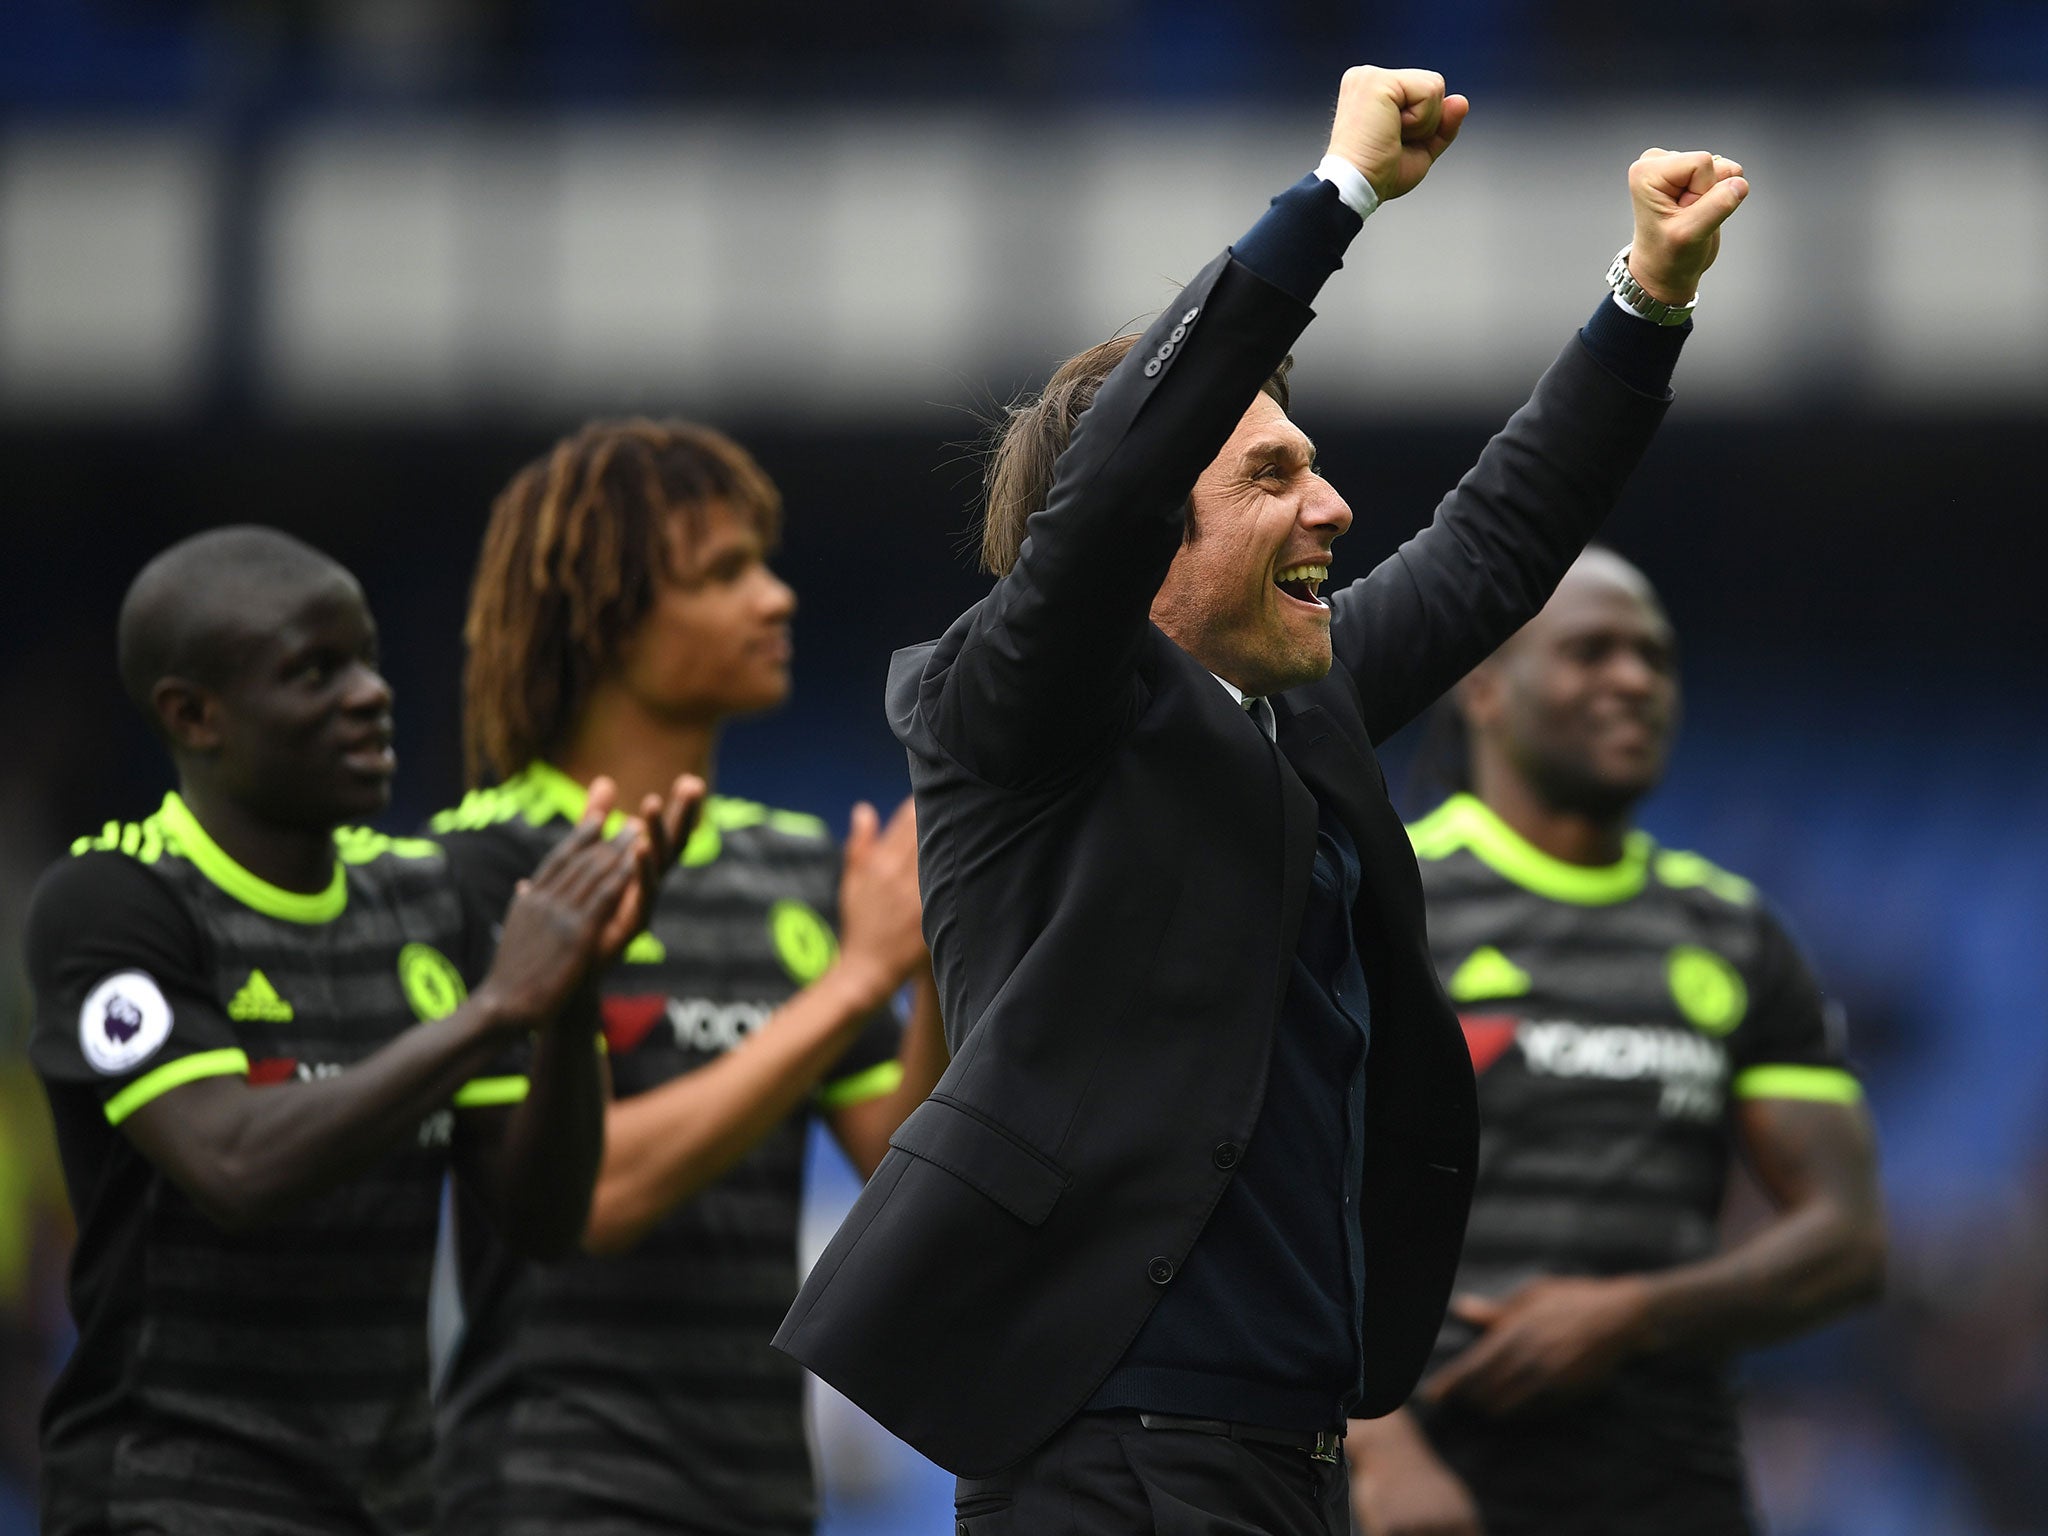 Conte celebrates with his players after Chelsea's recent win over Everton